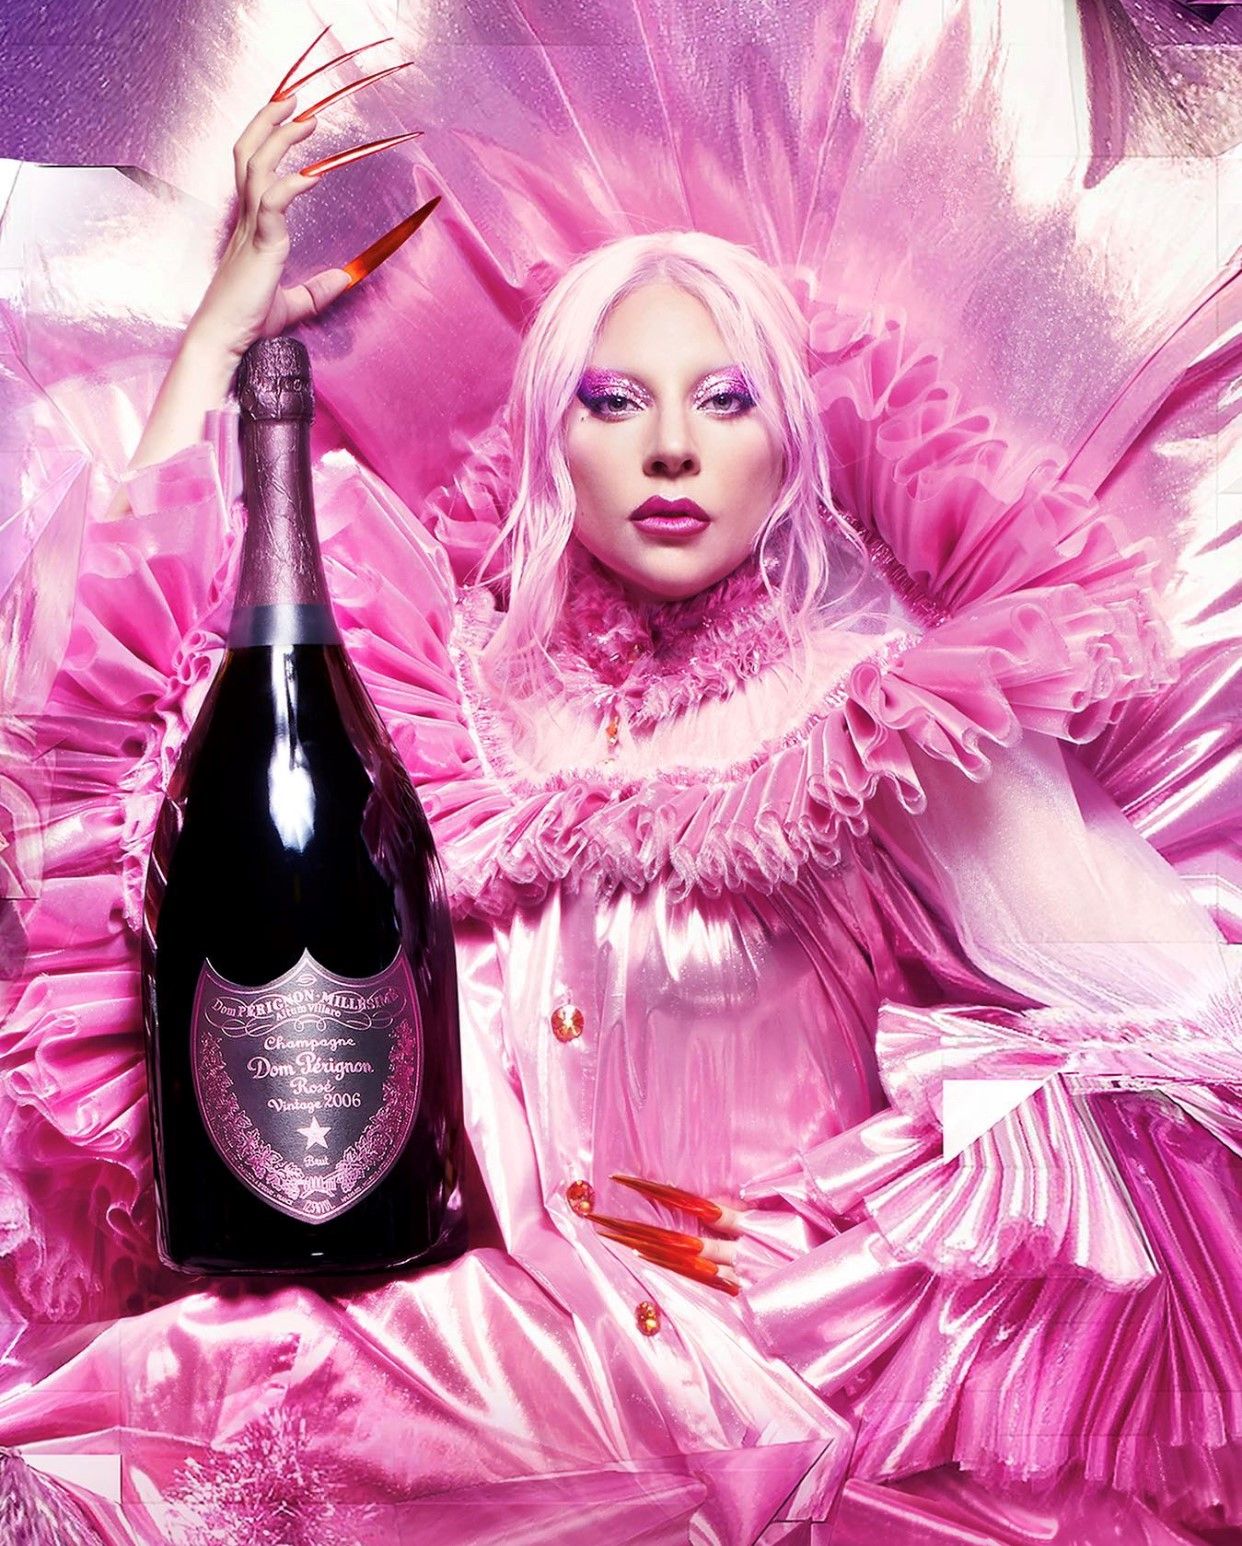 Lady Gaga with a bottle of Dom Perignon Rosé